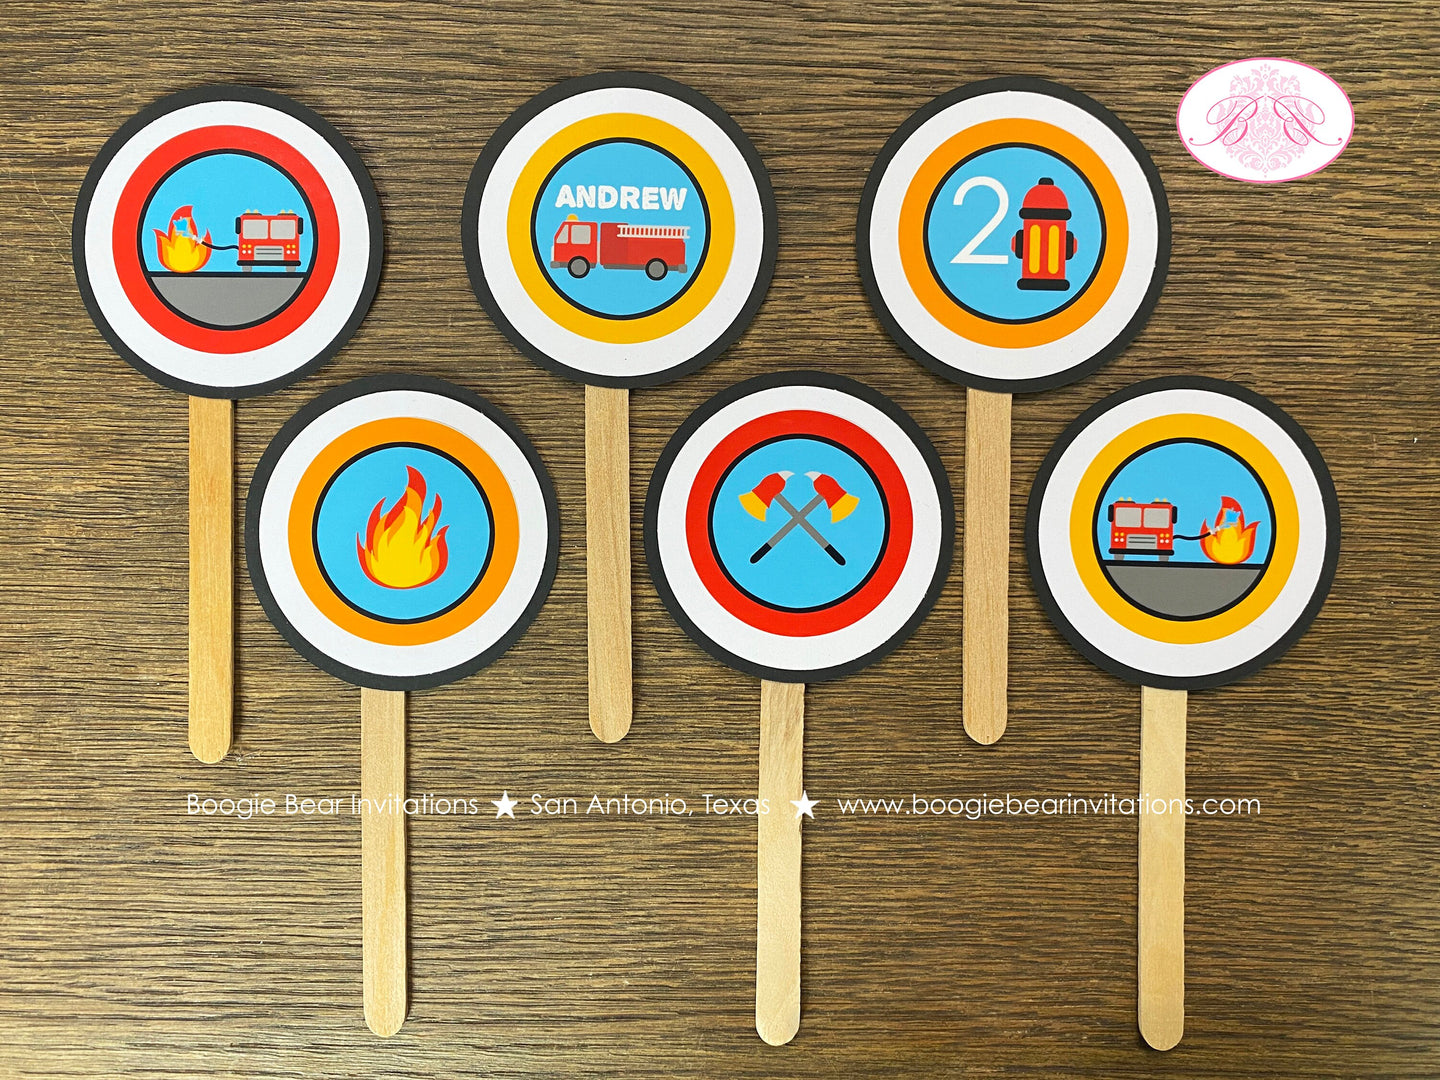 Red Fire Truck Party Cupcake Toppers Birthday Cake Display Fireman Man Firefighter Engine Fighter Hero Boogie Bear Invitations Andrew Theme